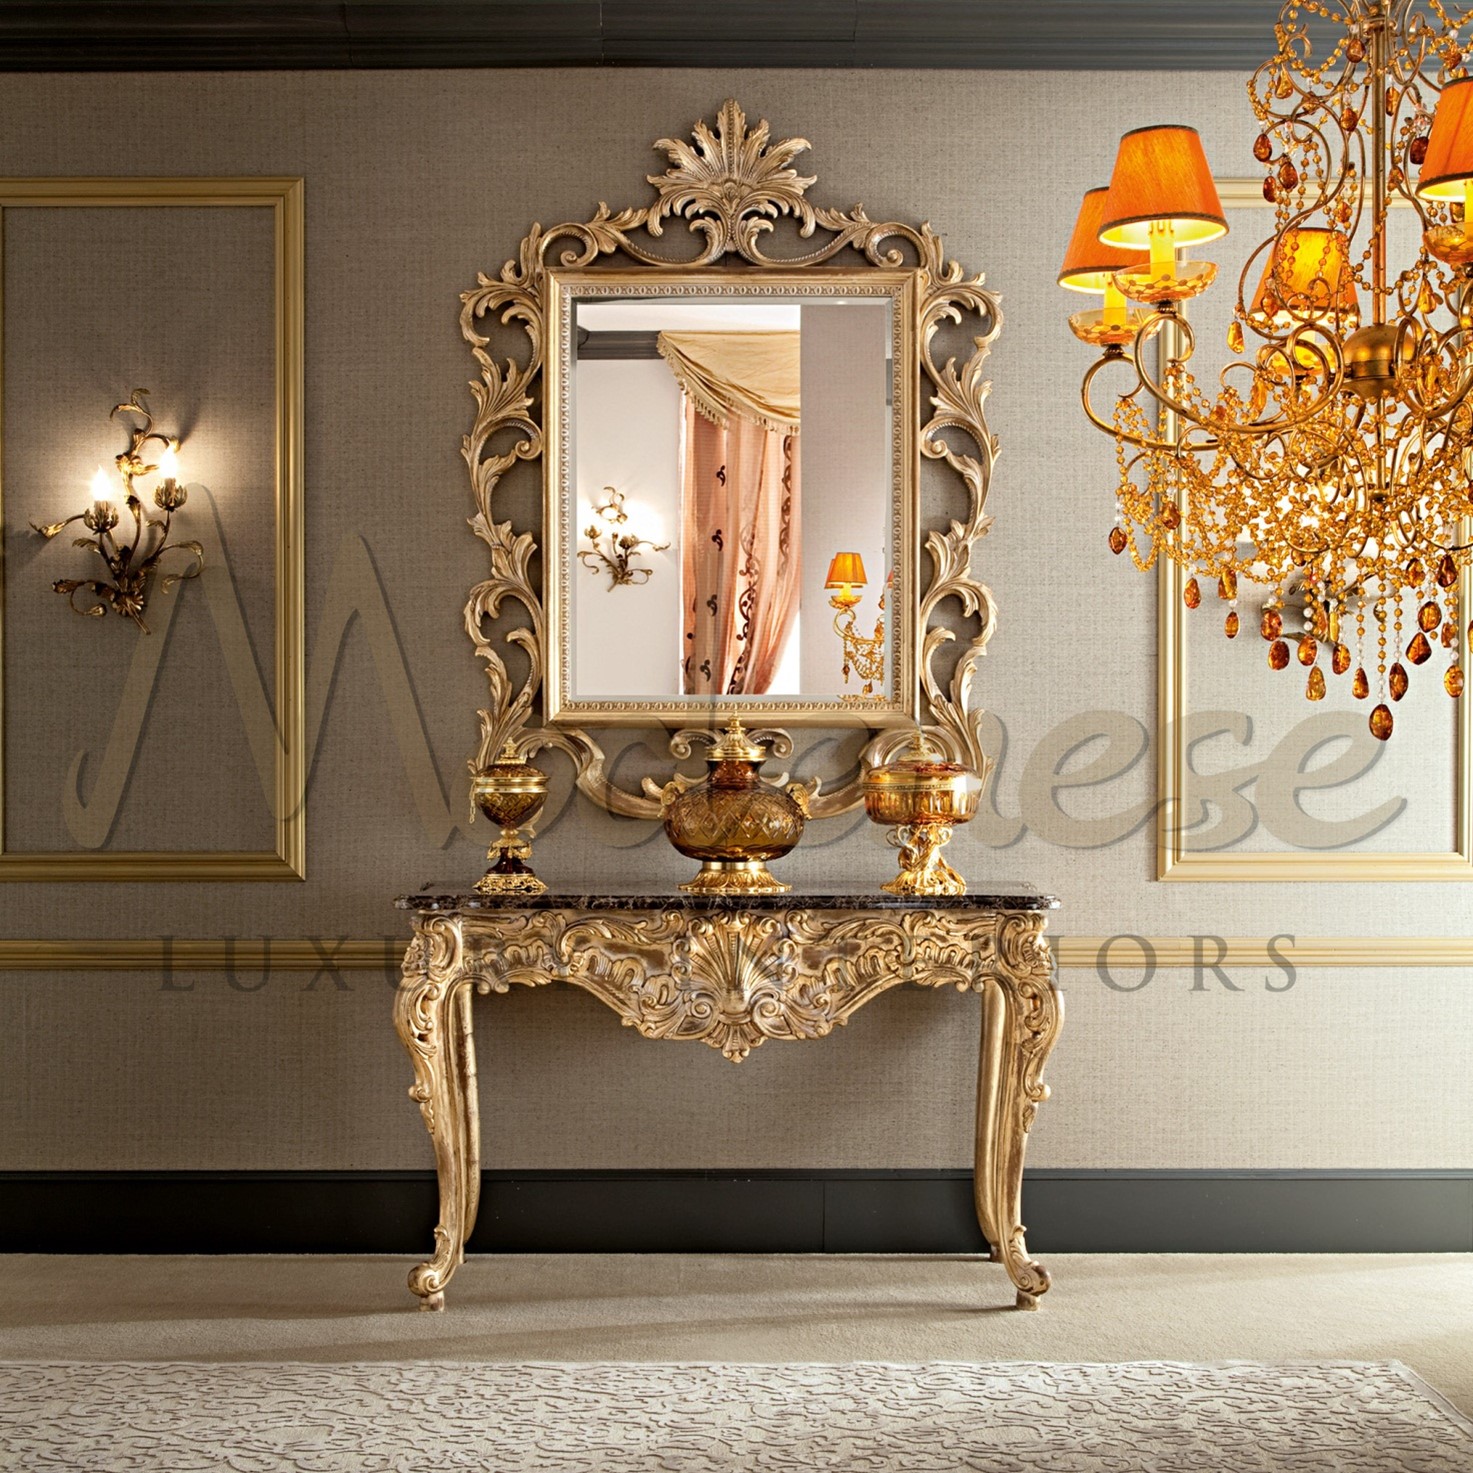 Bespoke Furniture by Modenese Luxury Interiors – Its all about details